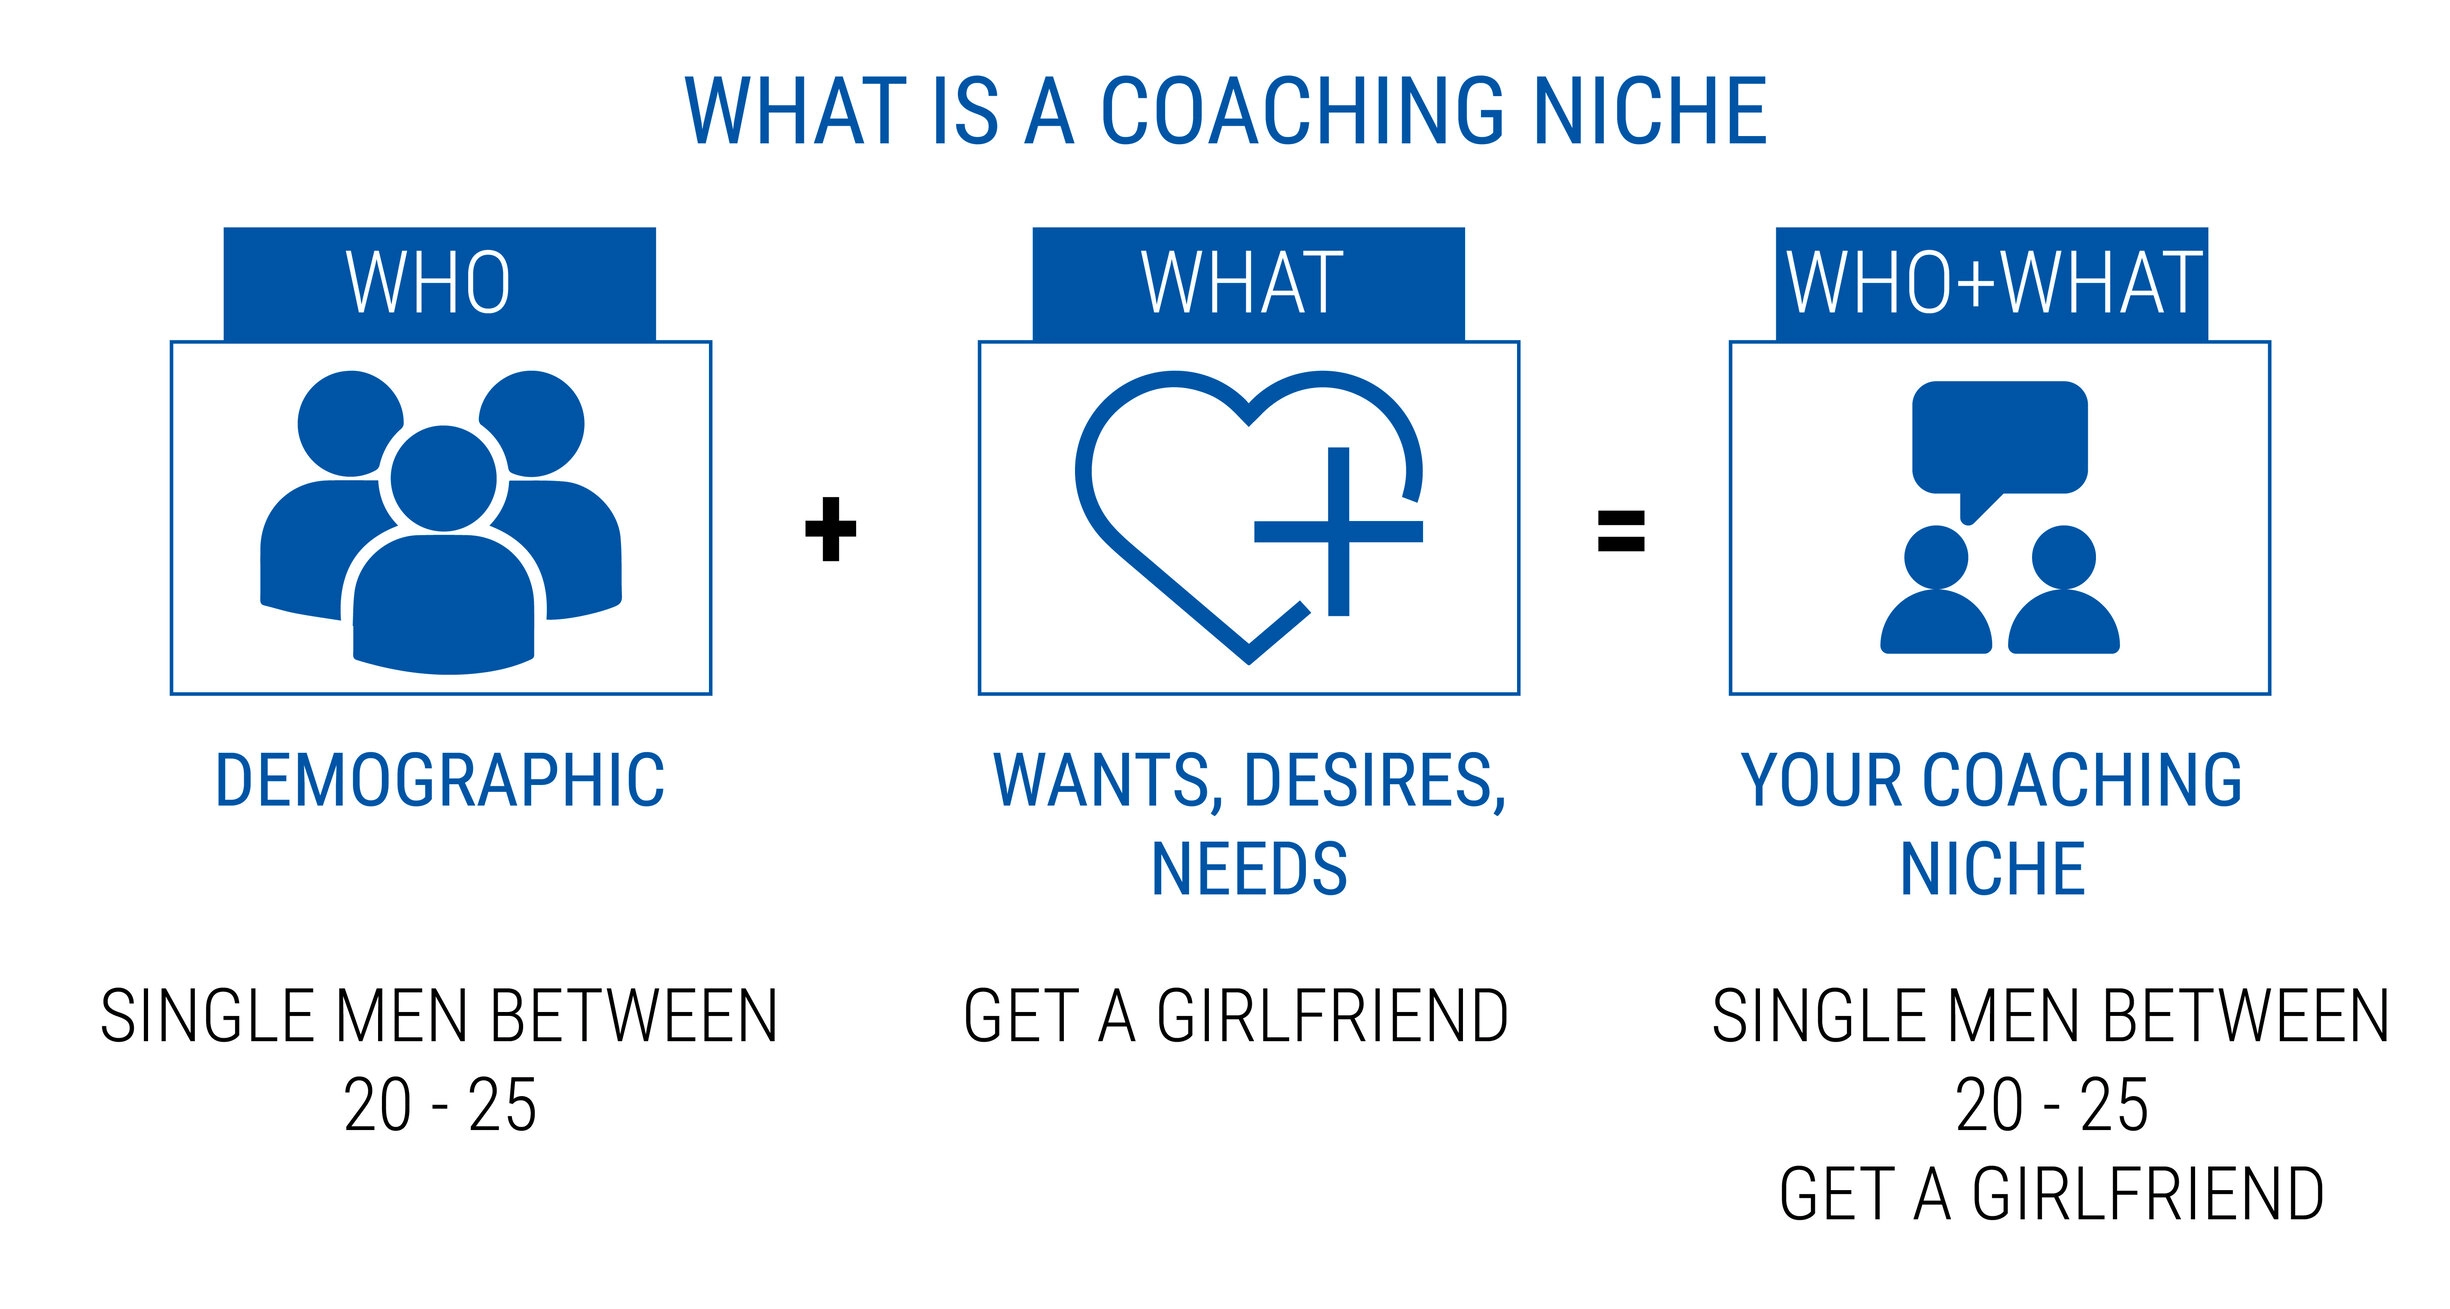 what is a life coaching niche - starting a coaching business while working full-time